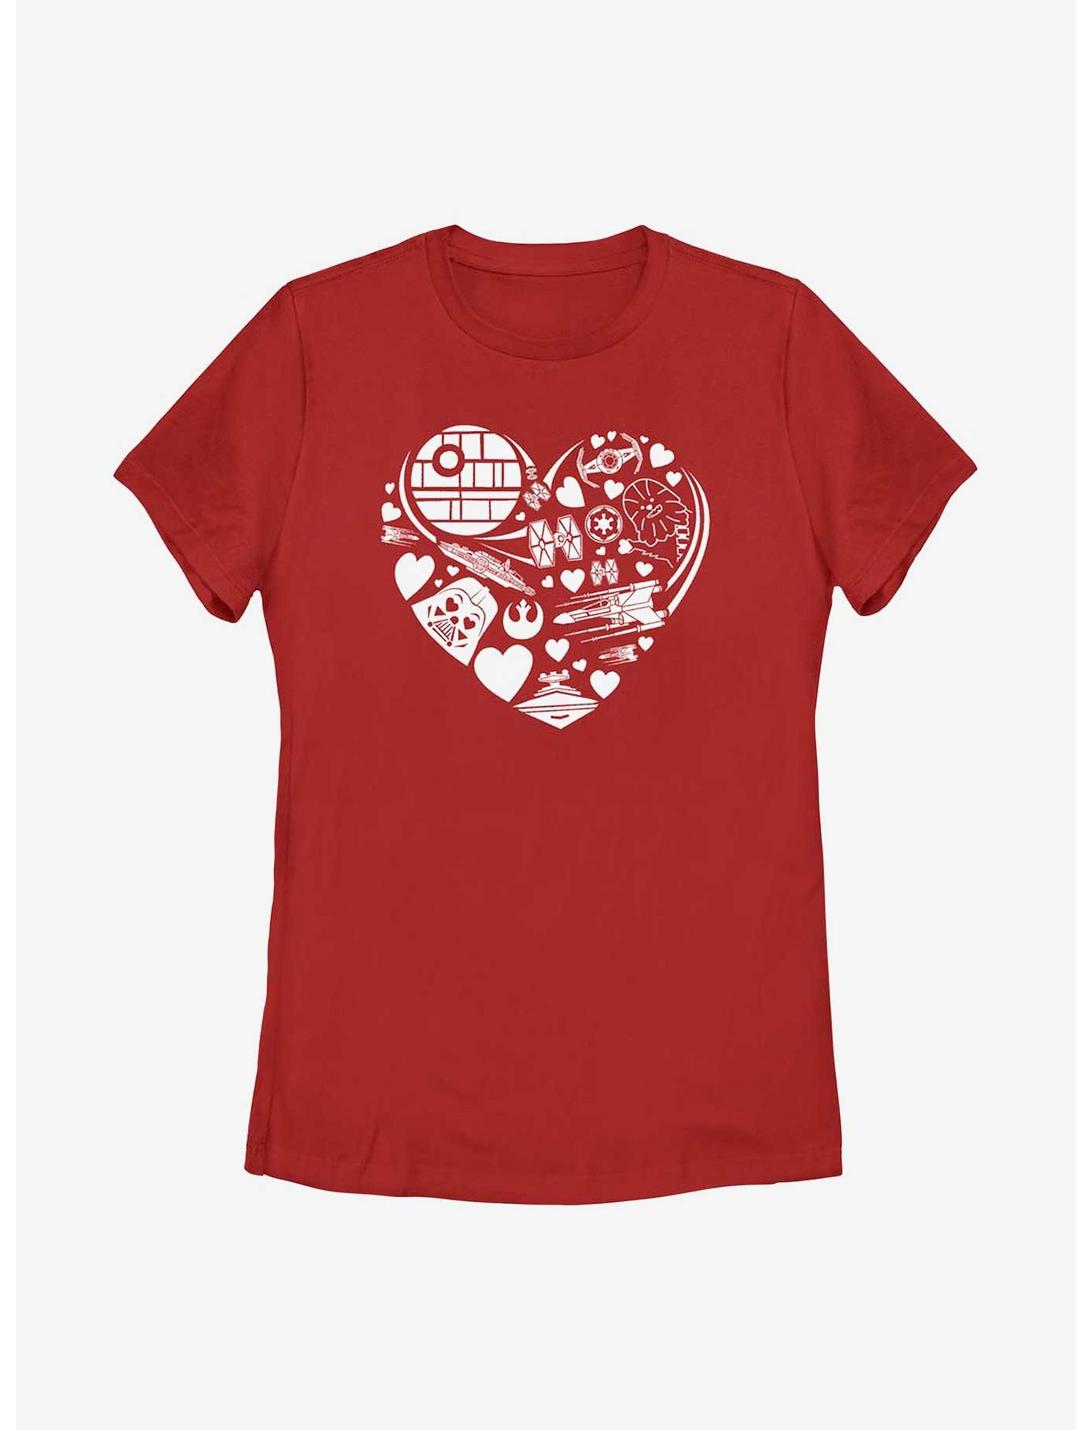 Star Wars Heart Ships Icons Womens T-Shirt, RED, hi-res